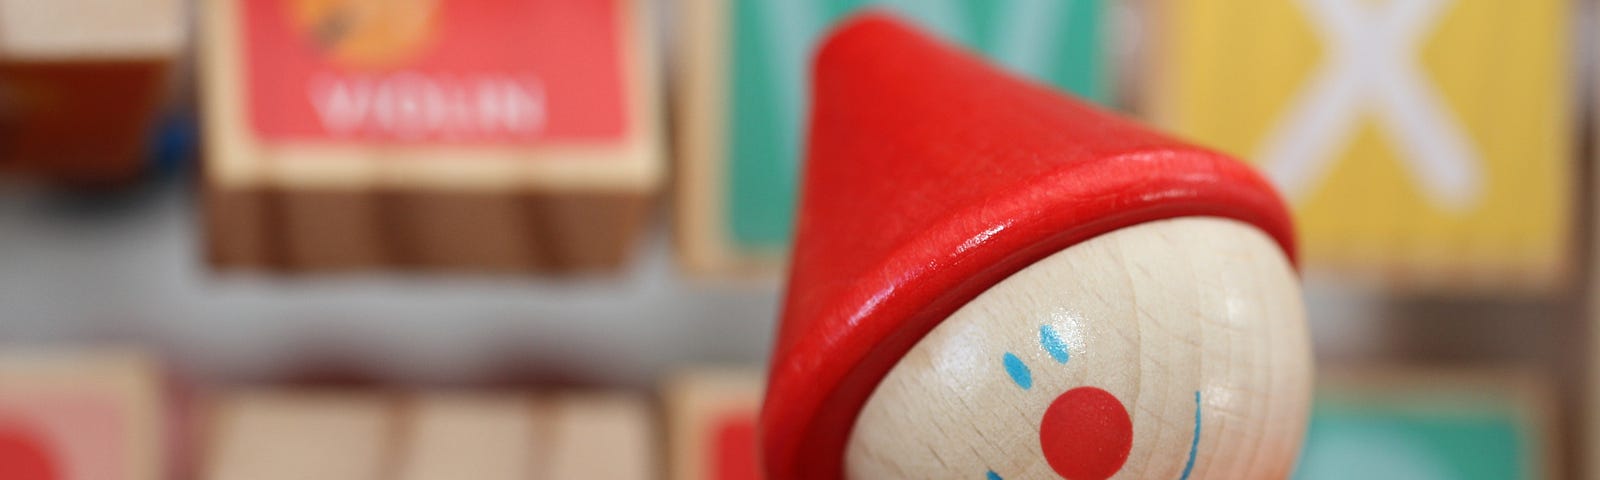 close up wooden colorful clown toy with wooden blocks in the background